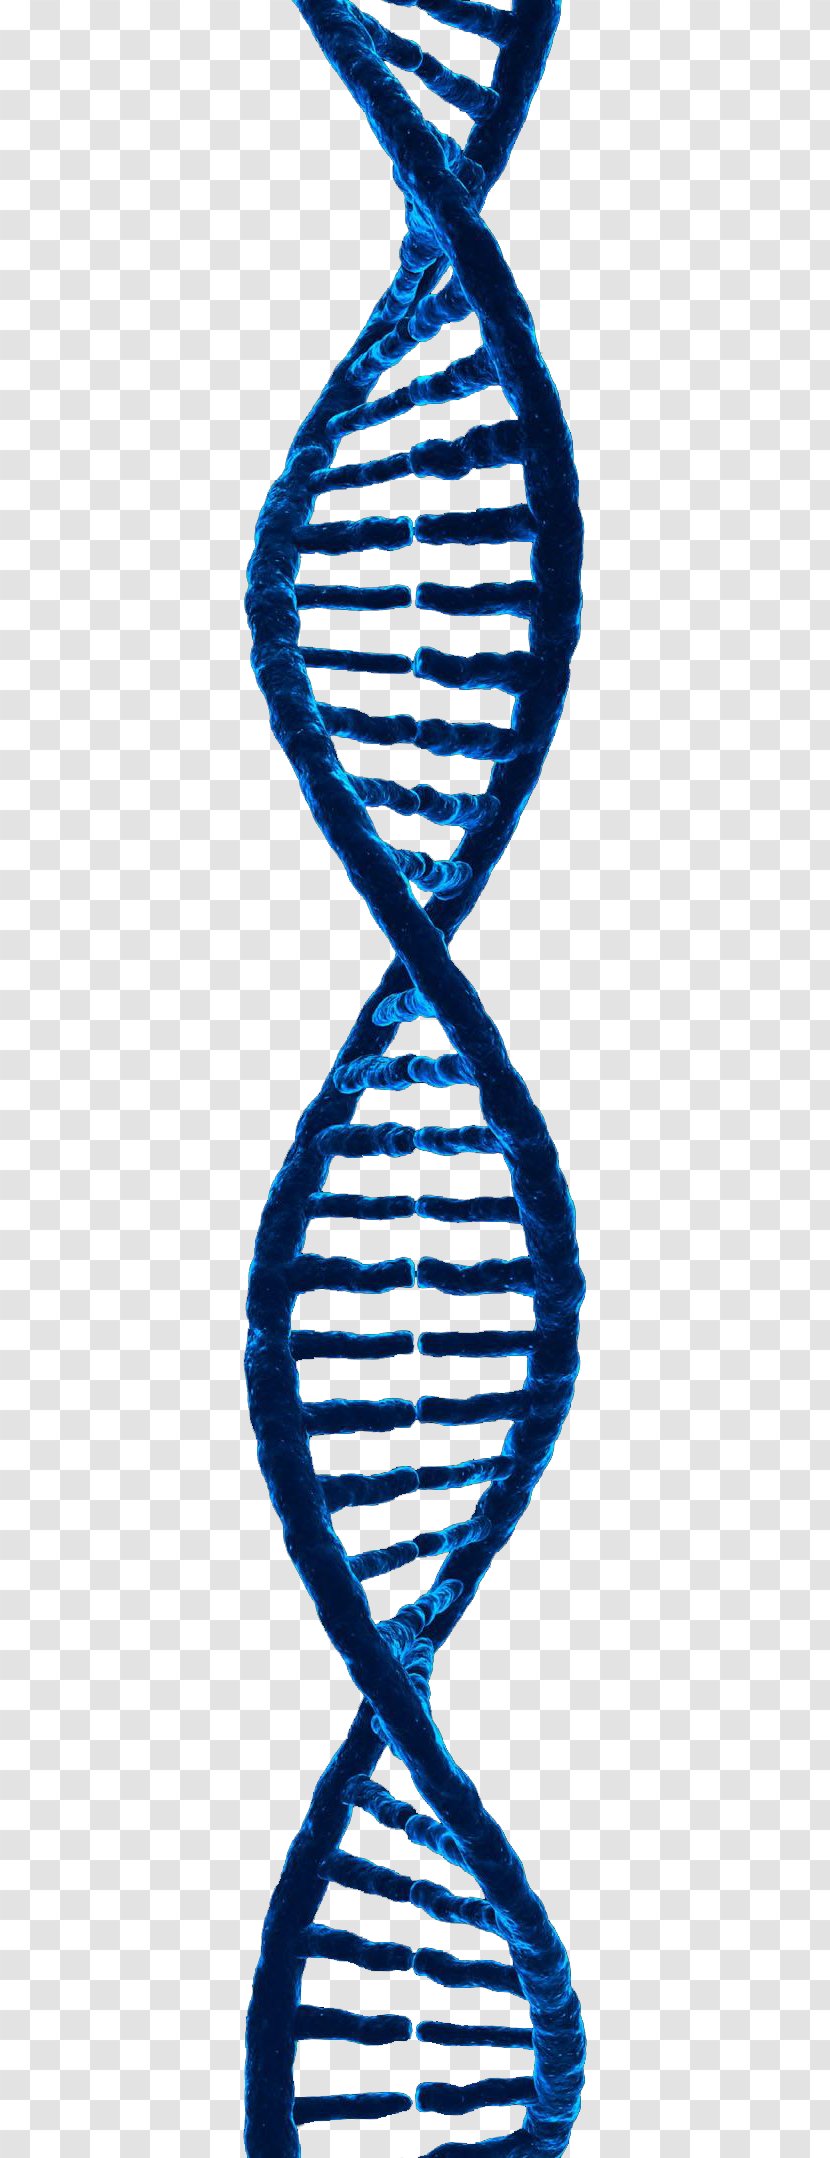 DNA 3D Rendering Computer Graphics - Rna - Free To Pull Material Transparent PNG